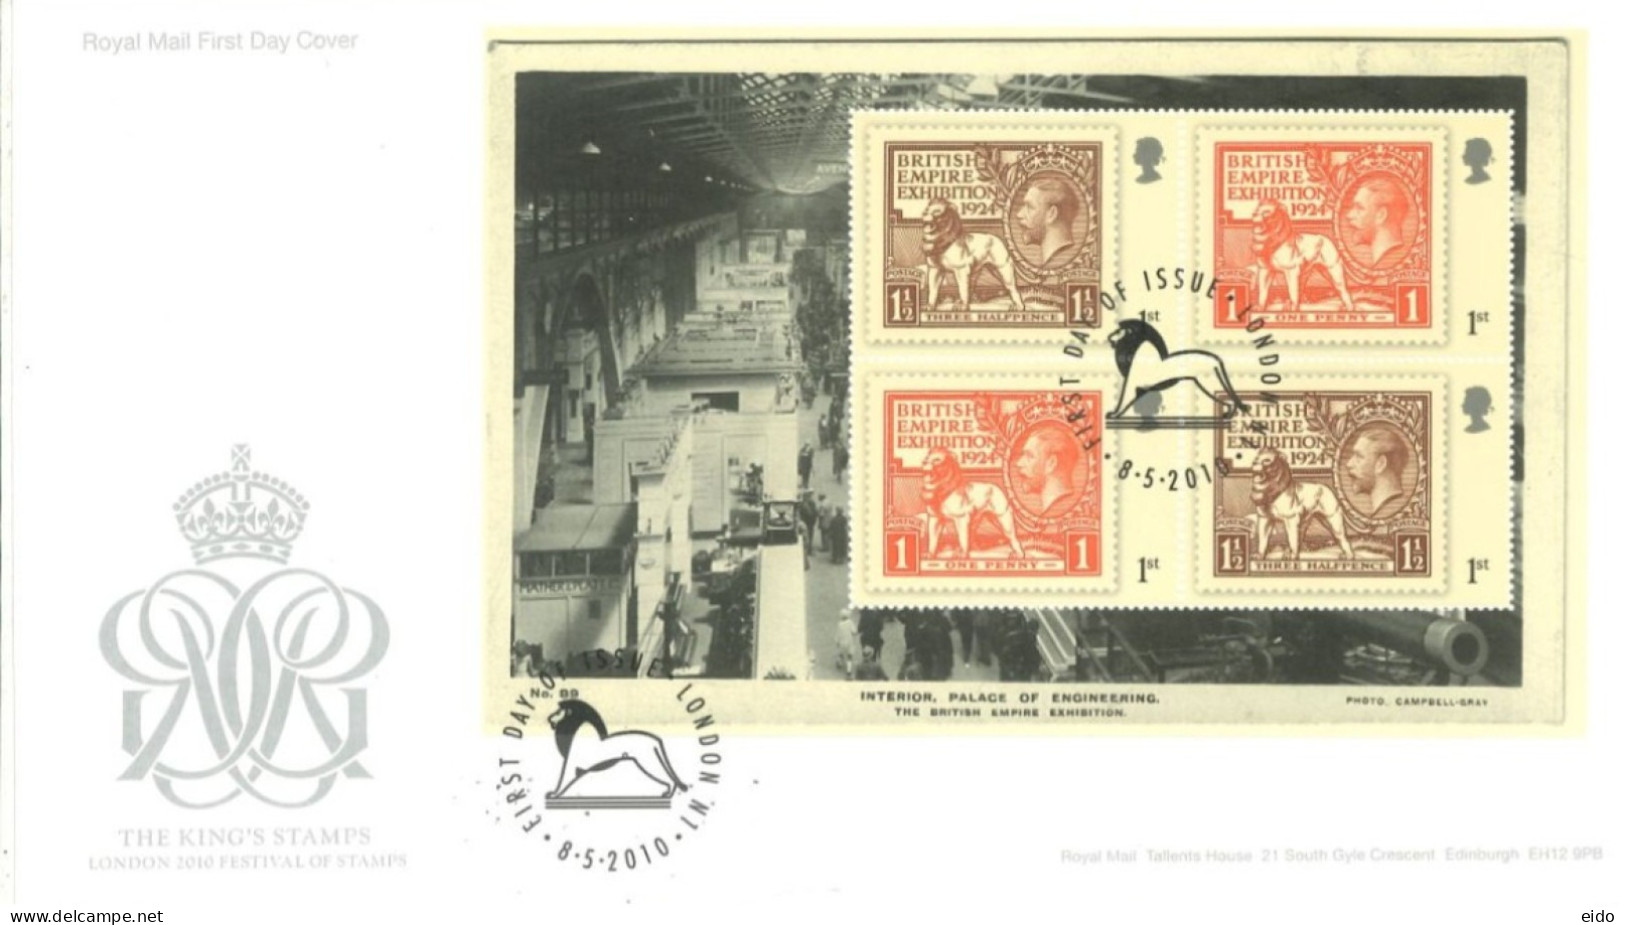 GREAT BRITAIN - 2010, FDC OF MINIATURE SHEET OF THE KING'S STAMPS, LONDON 2010 FESTIVAL OF STAMPS. - Brieven En Documenten